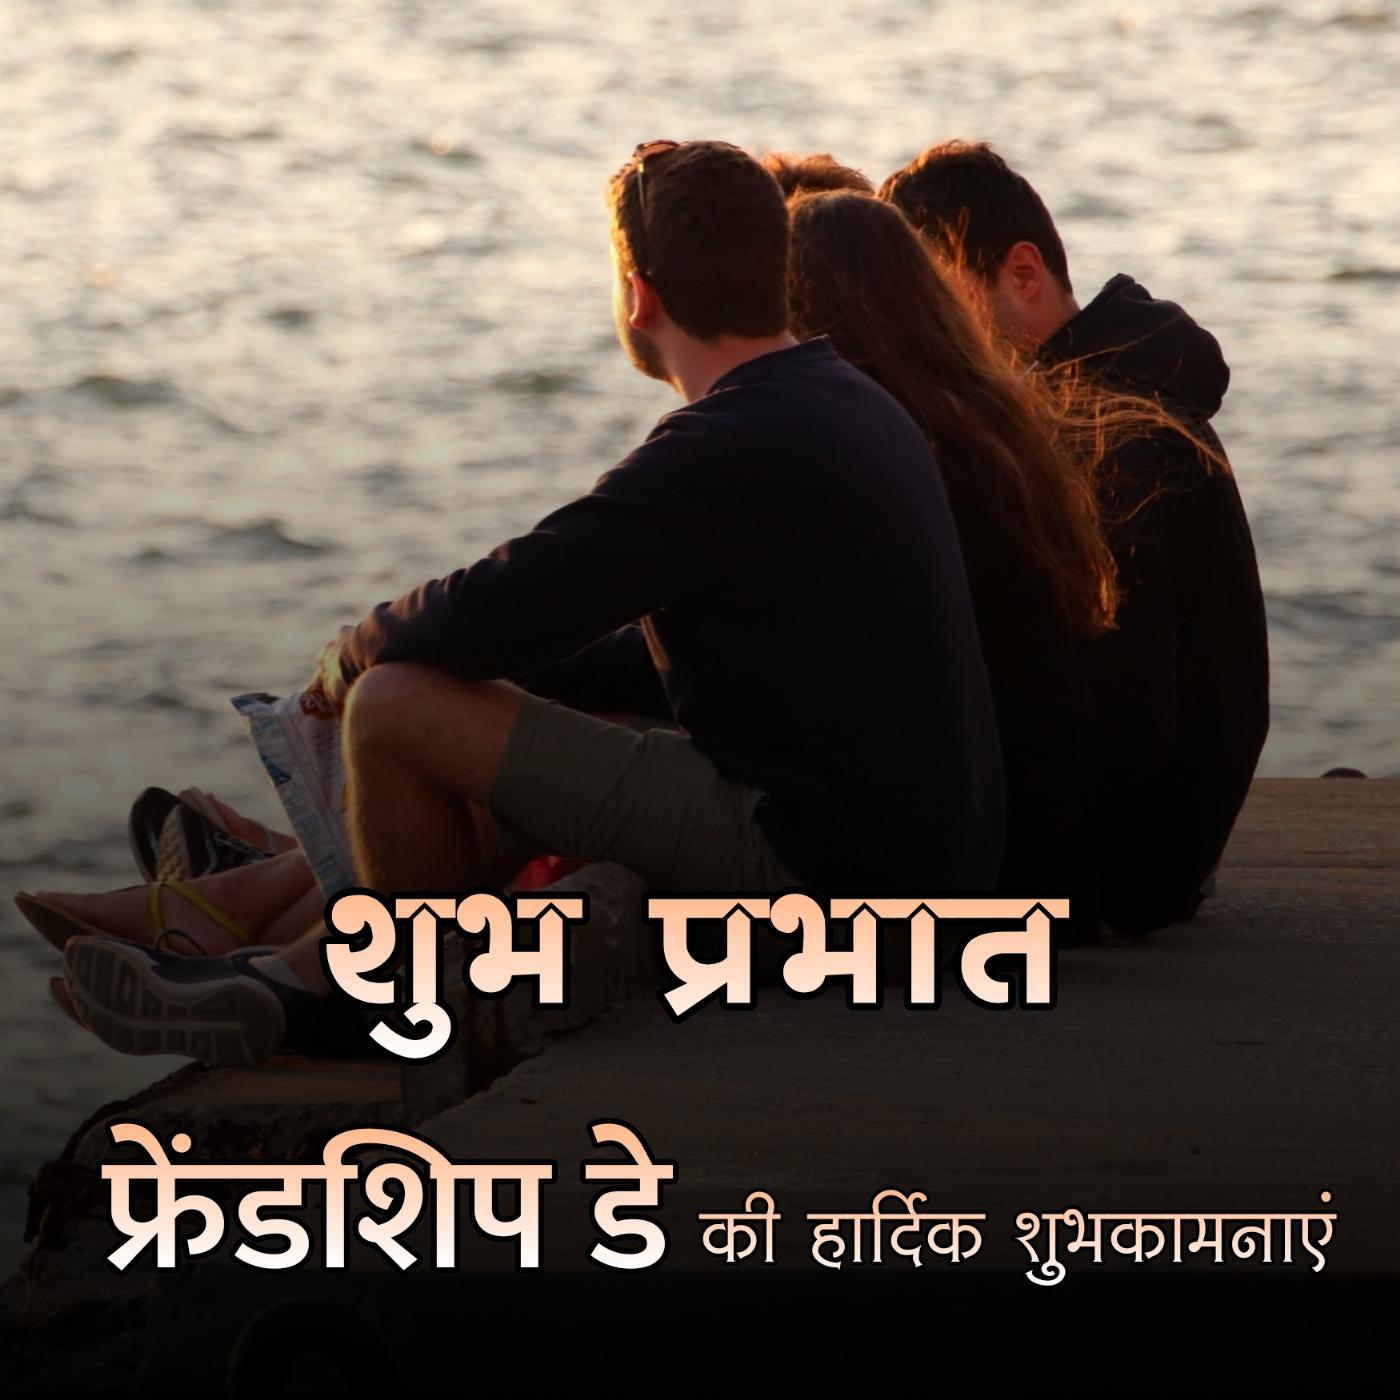 Good Morning Happy Friendship Day Images in Hindi